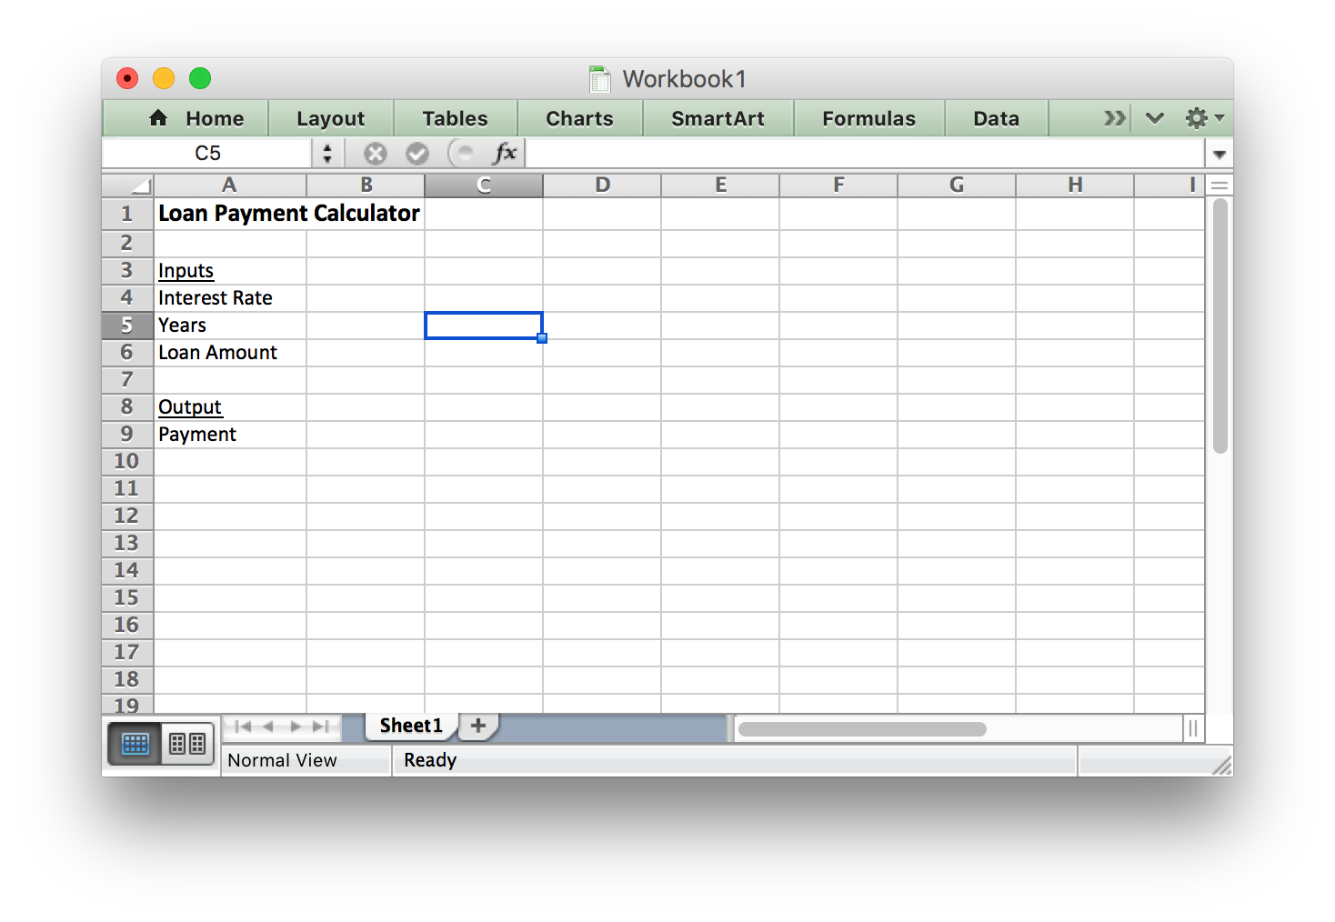 Excel sheet with the inputs and outputs listed.